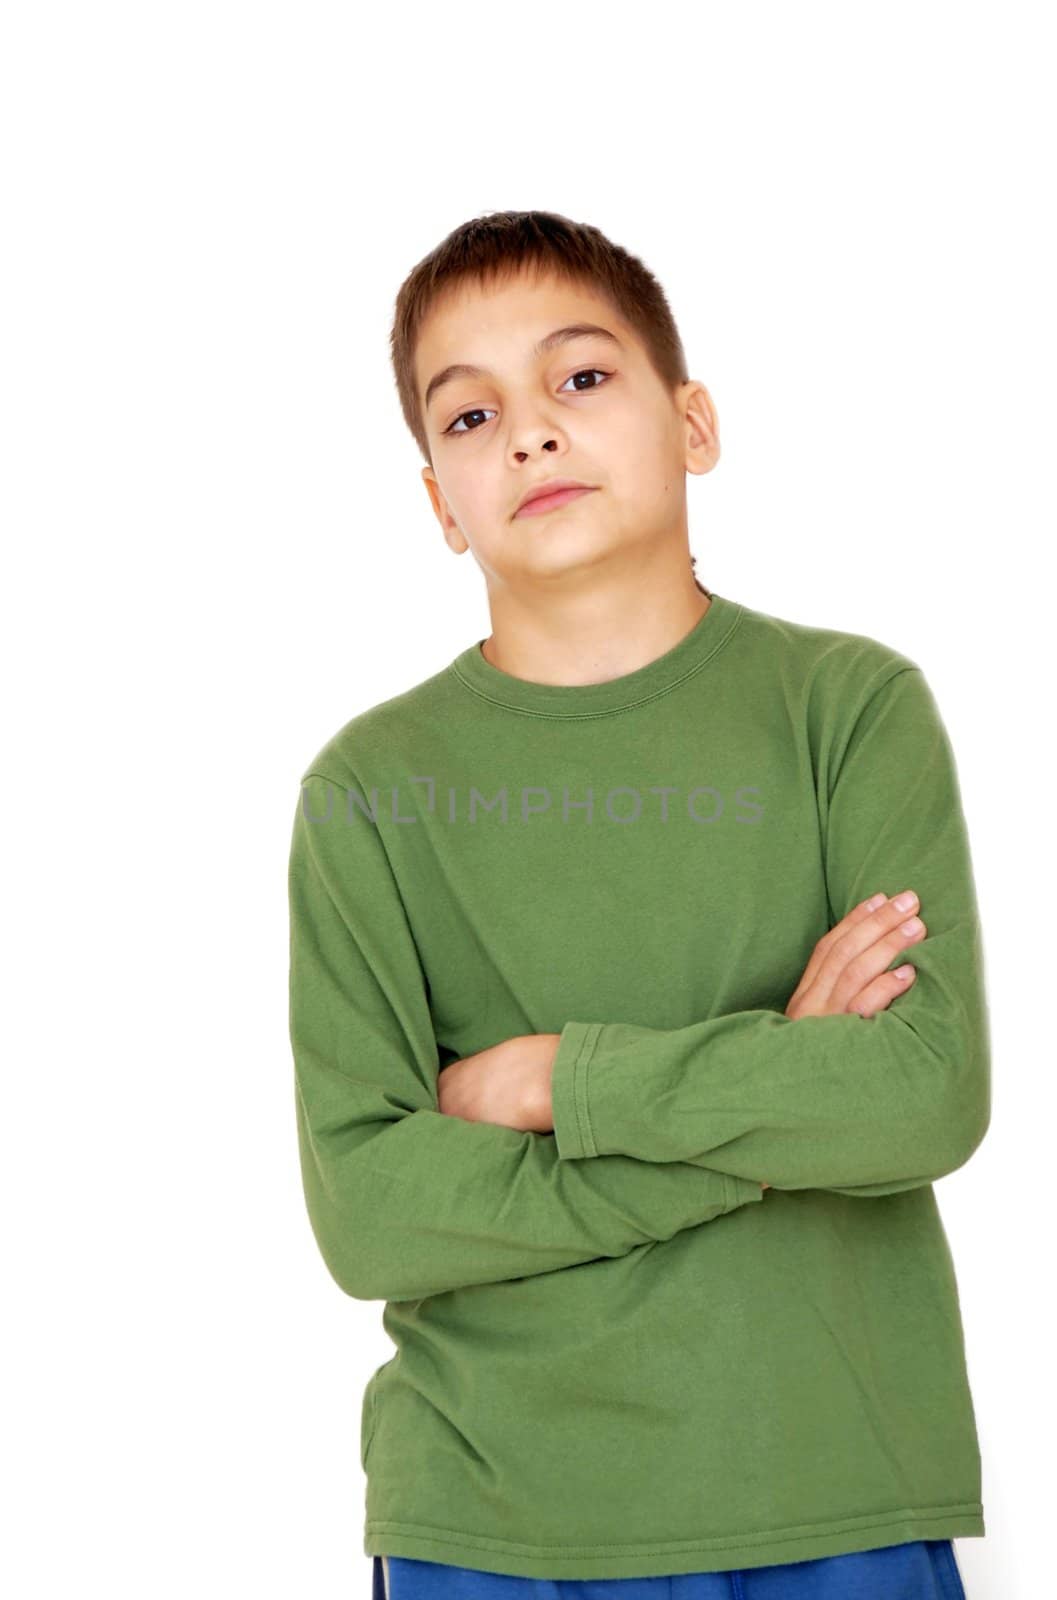 teenage boy with crossed arms on white background